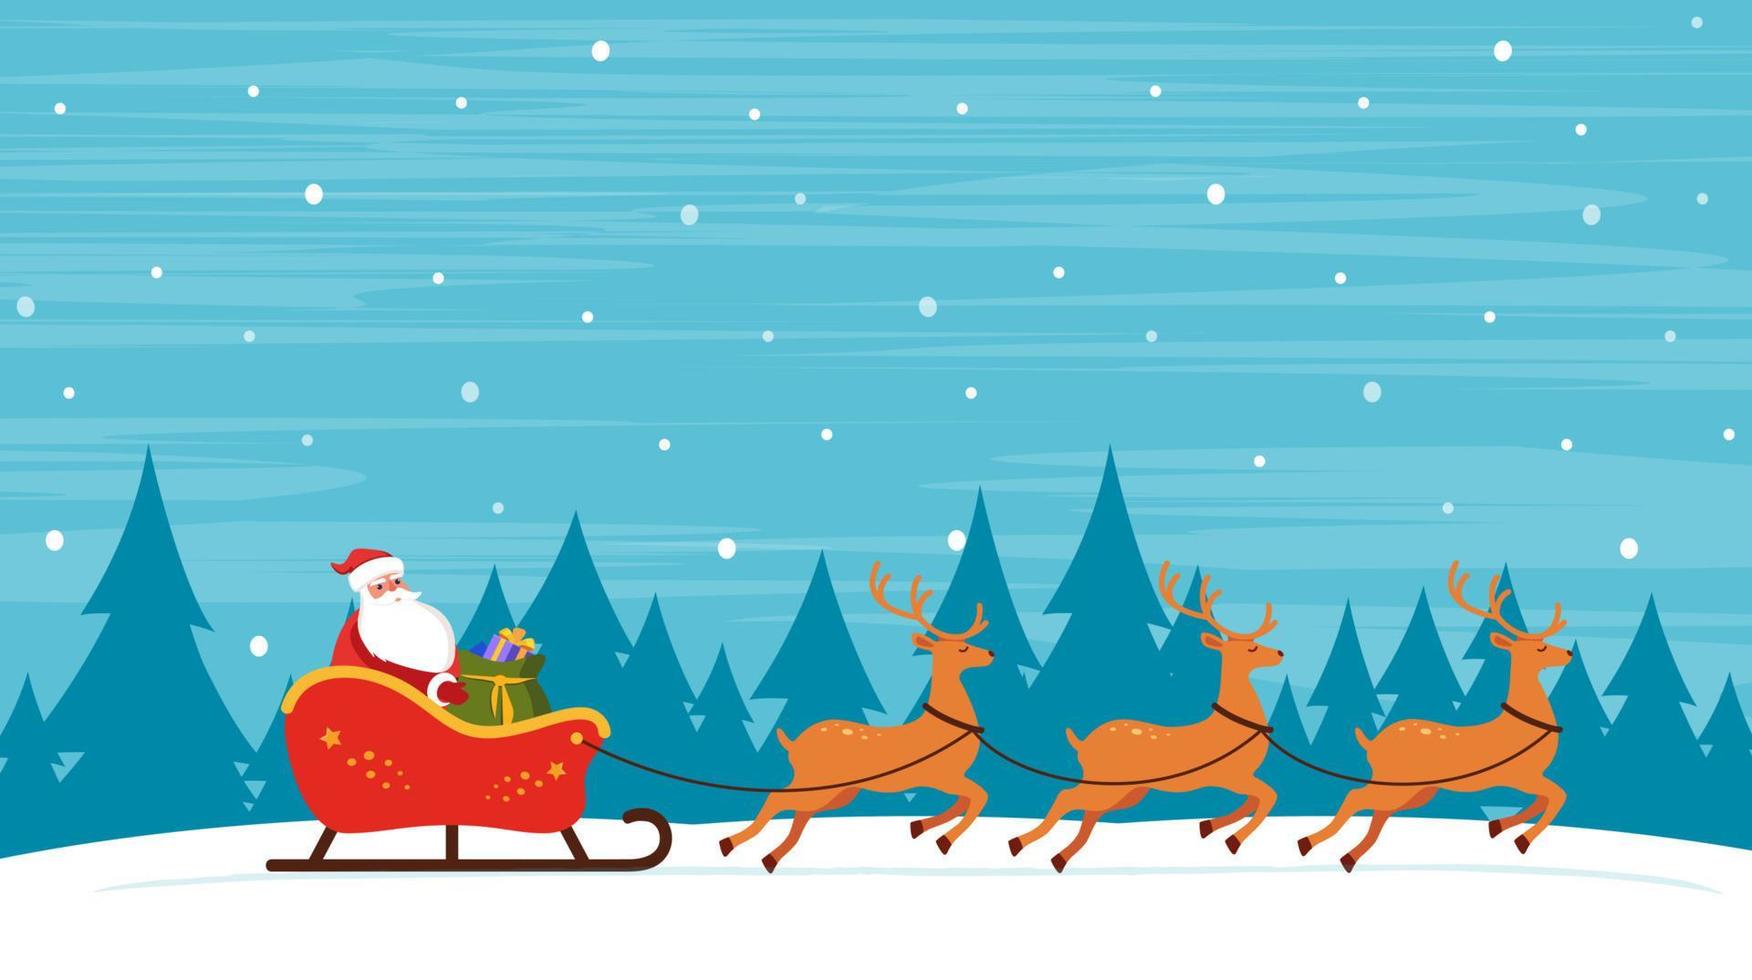 Santa Riding In Sledge With Reindeers on winter snowy background. Christmas Greeting card vector illustration.